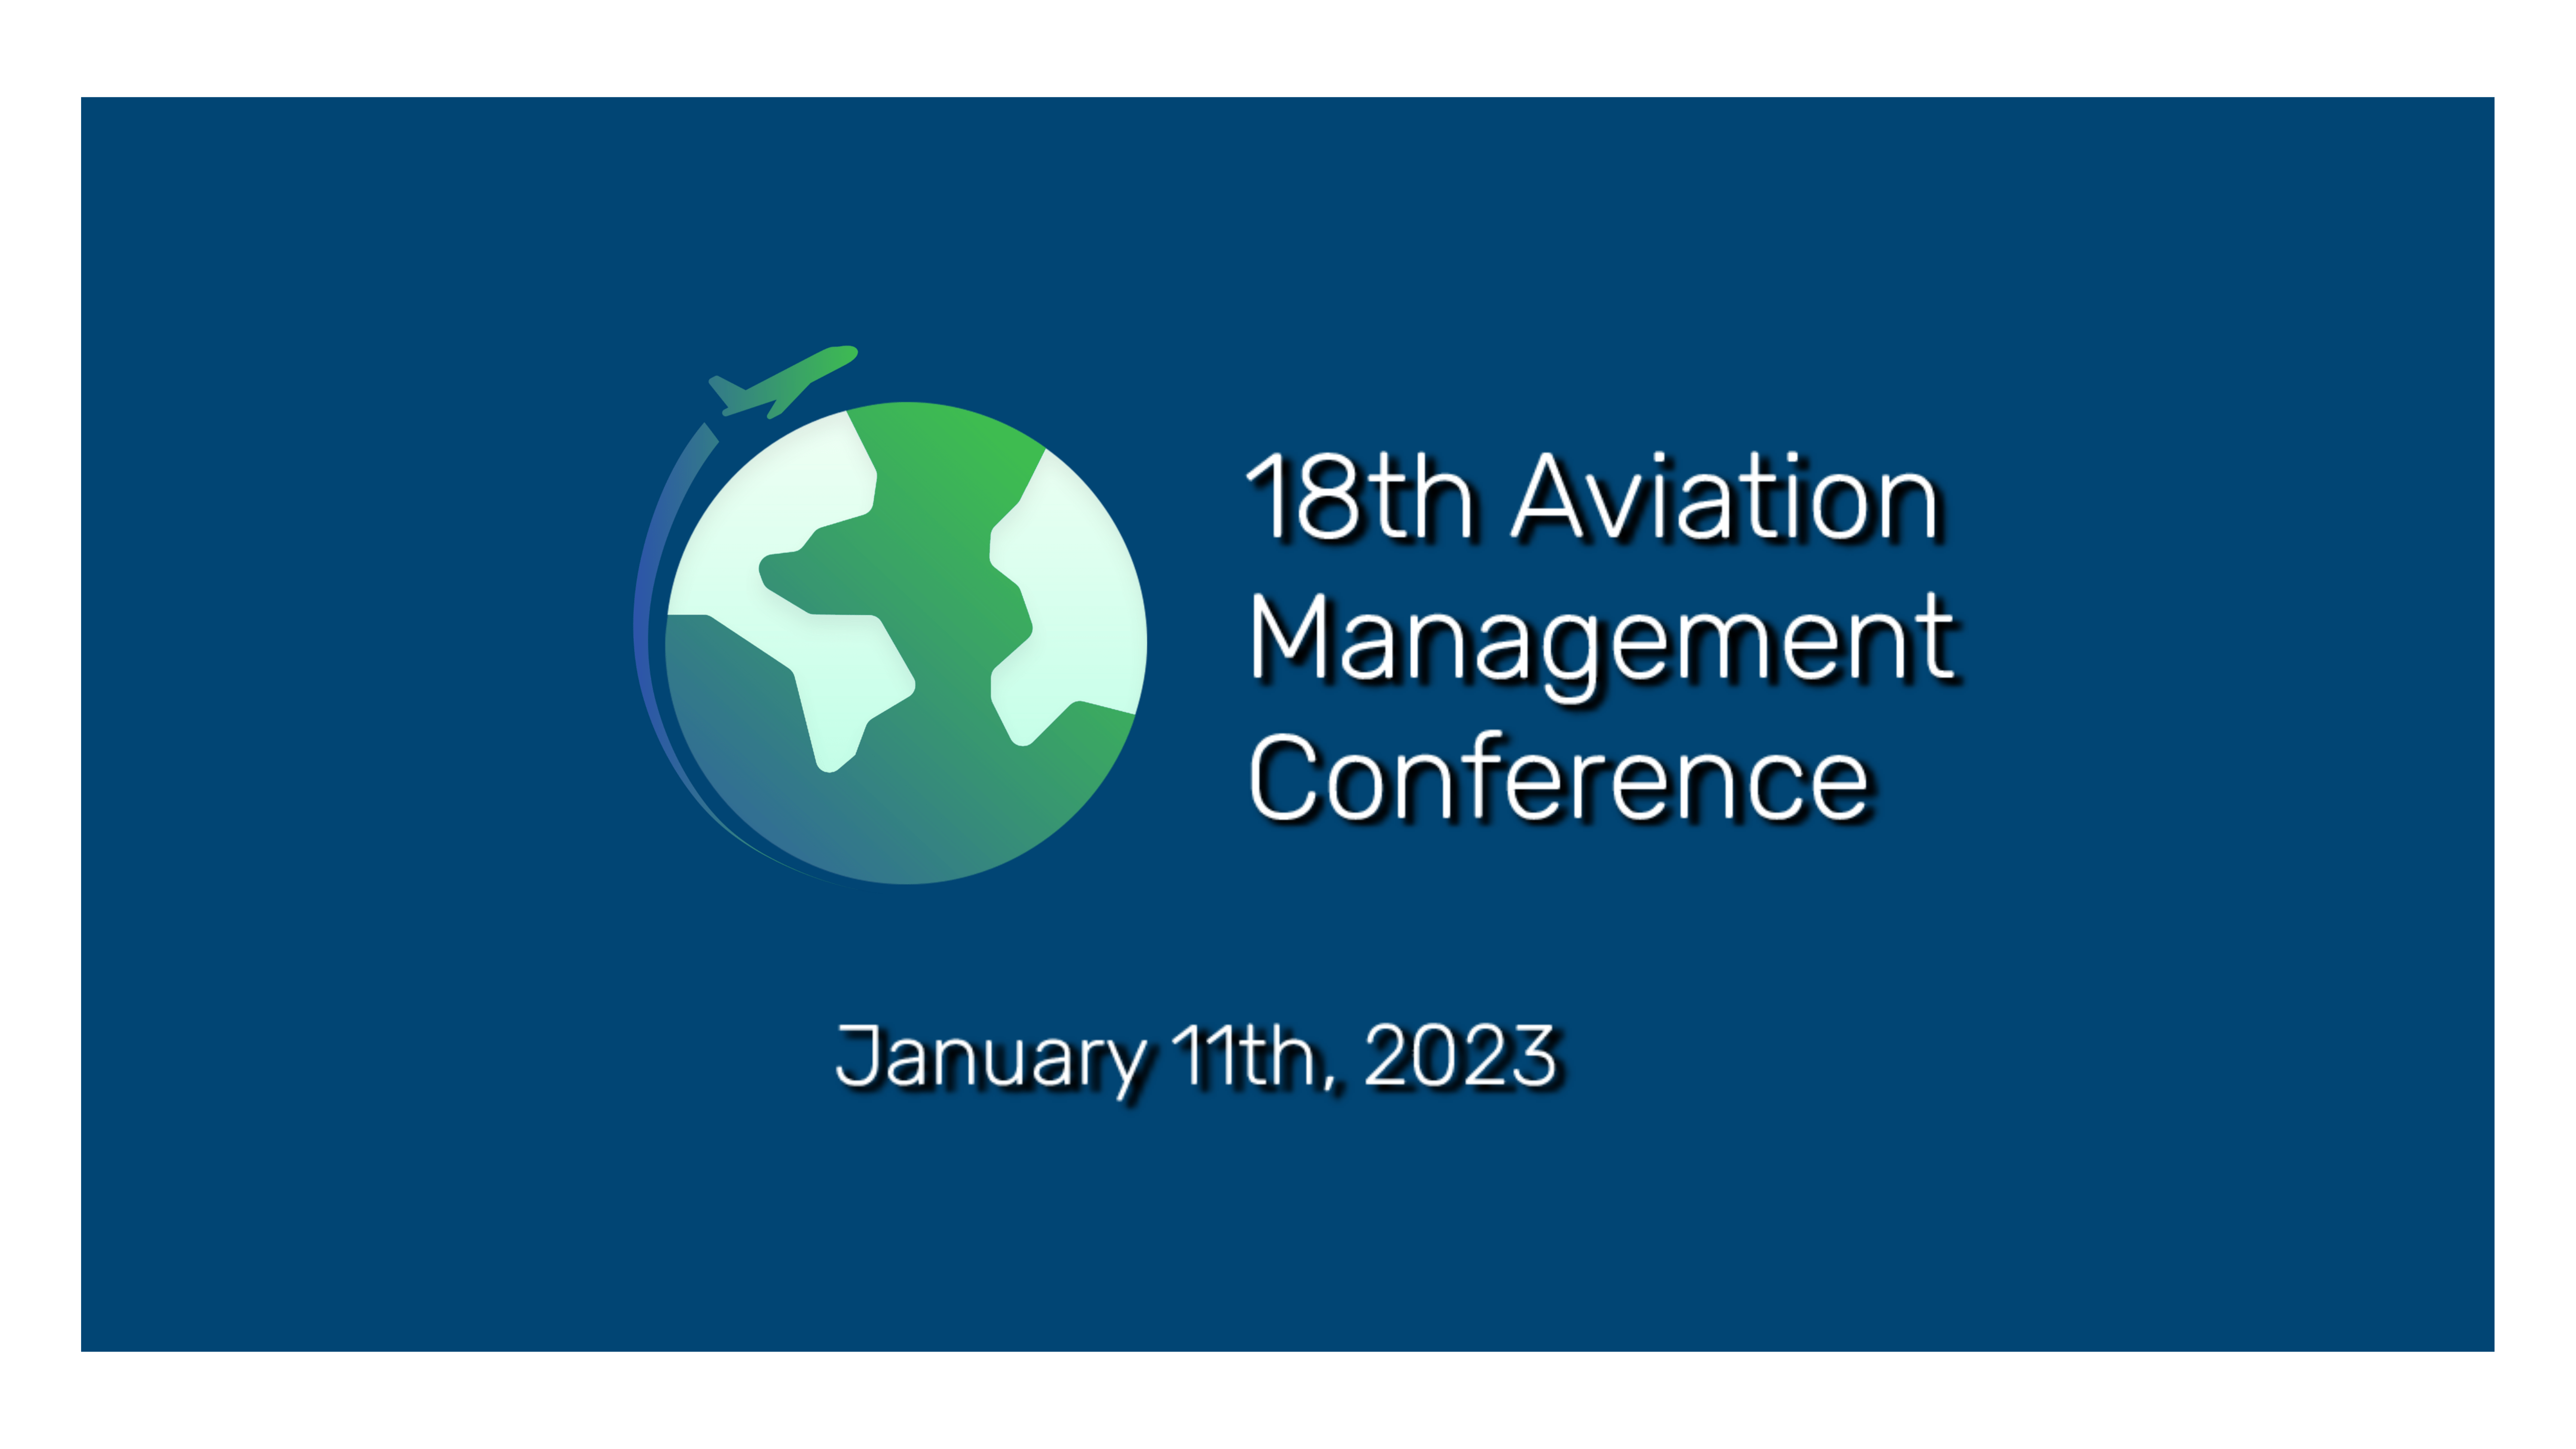 The Journey of Transition - Die 18. Aviation Management Conference